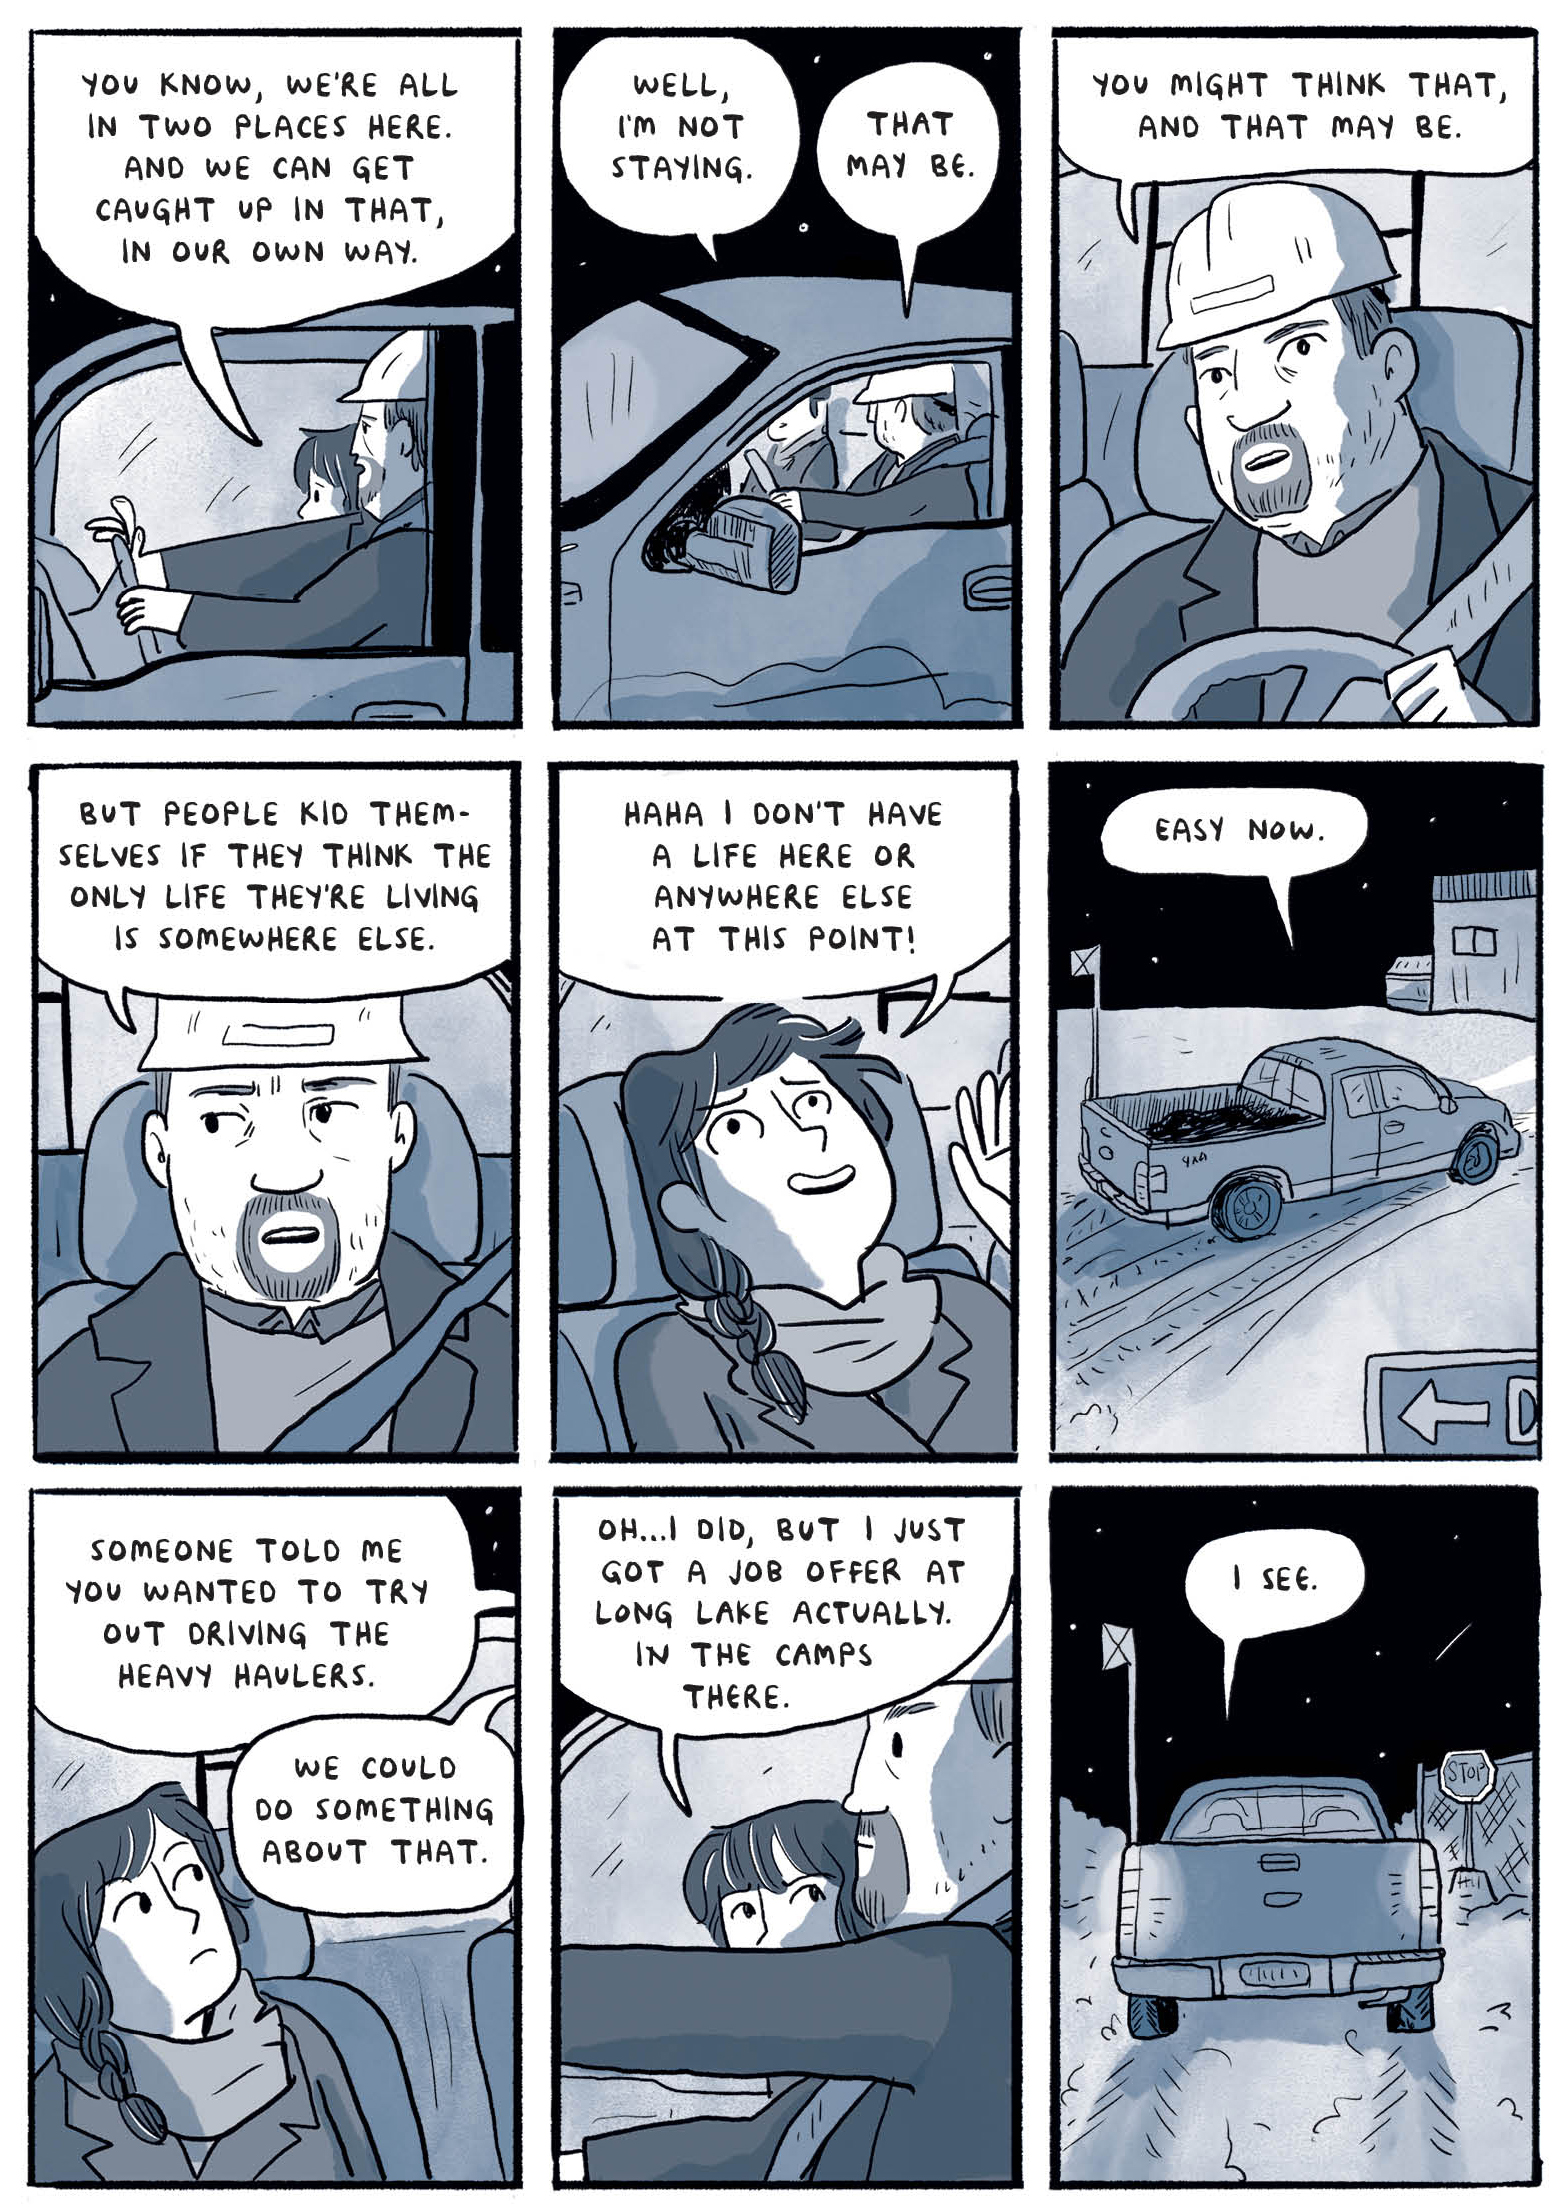 Excerpt from "Ducks: Two Years in the Oil Sands" by Kate Beaton